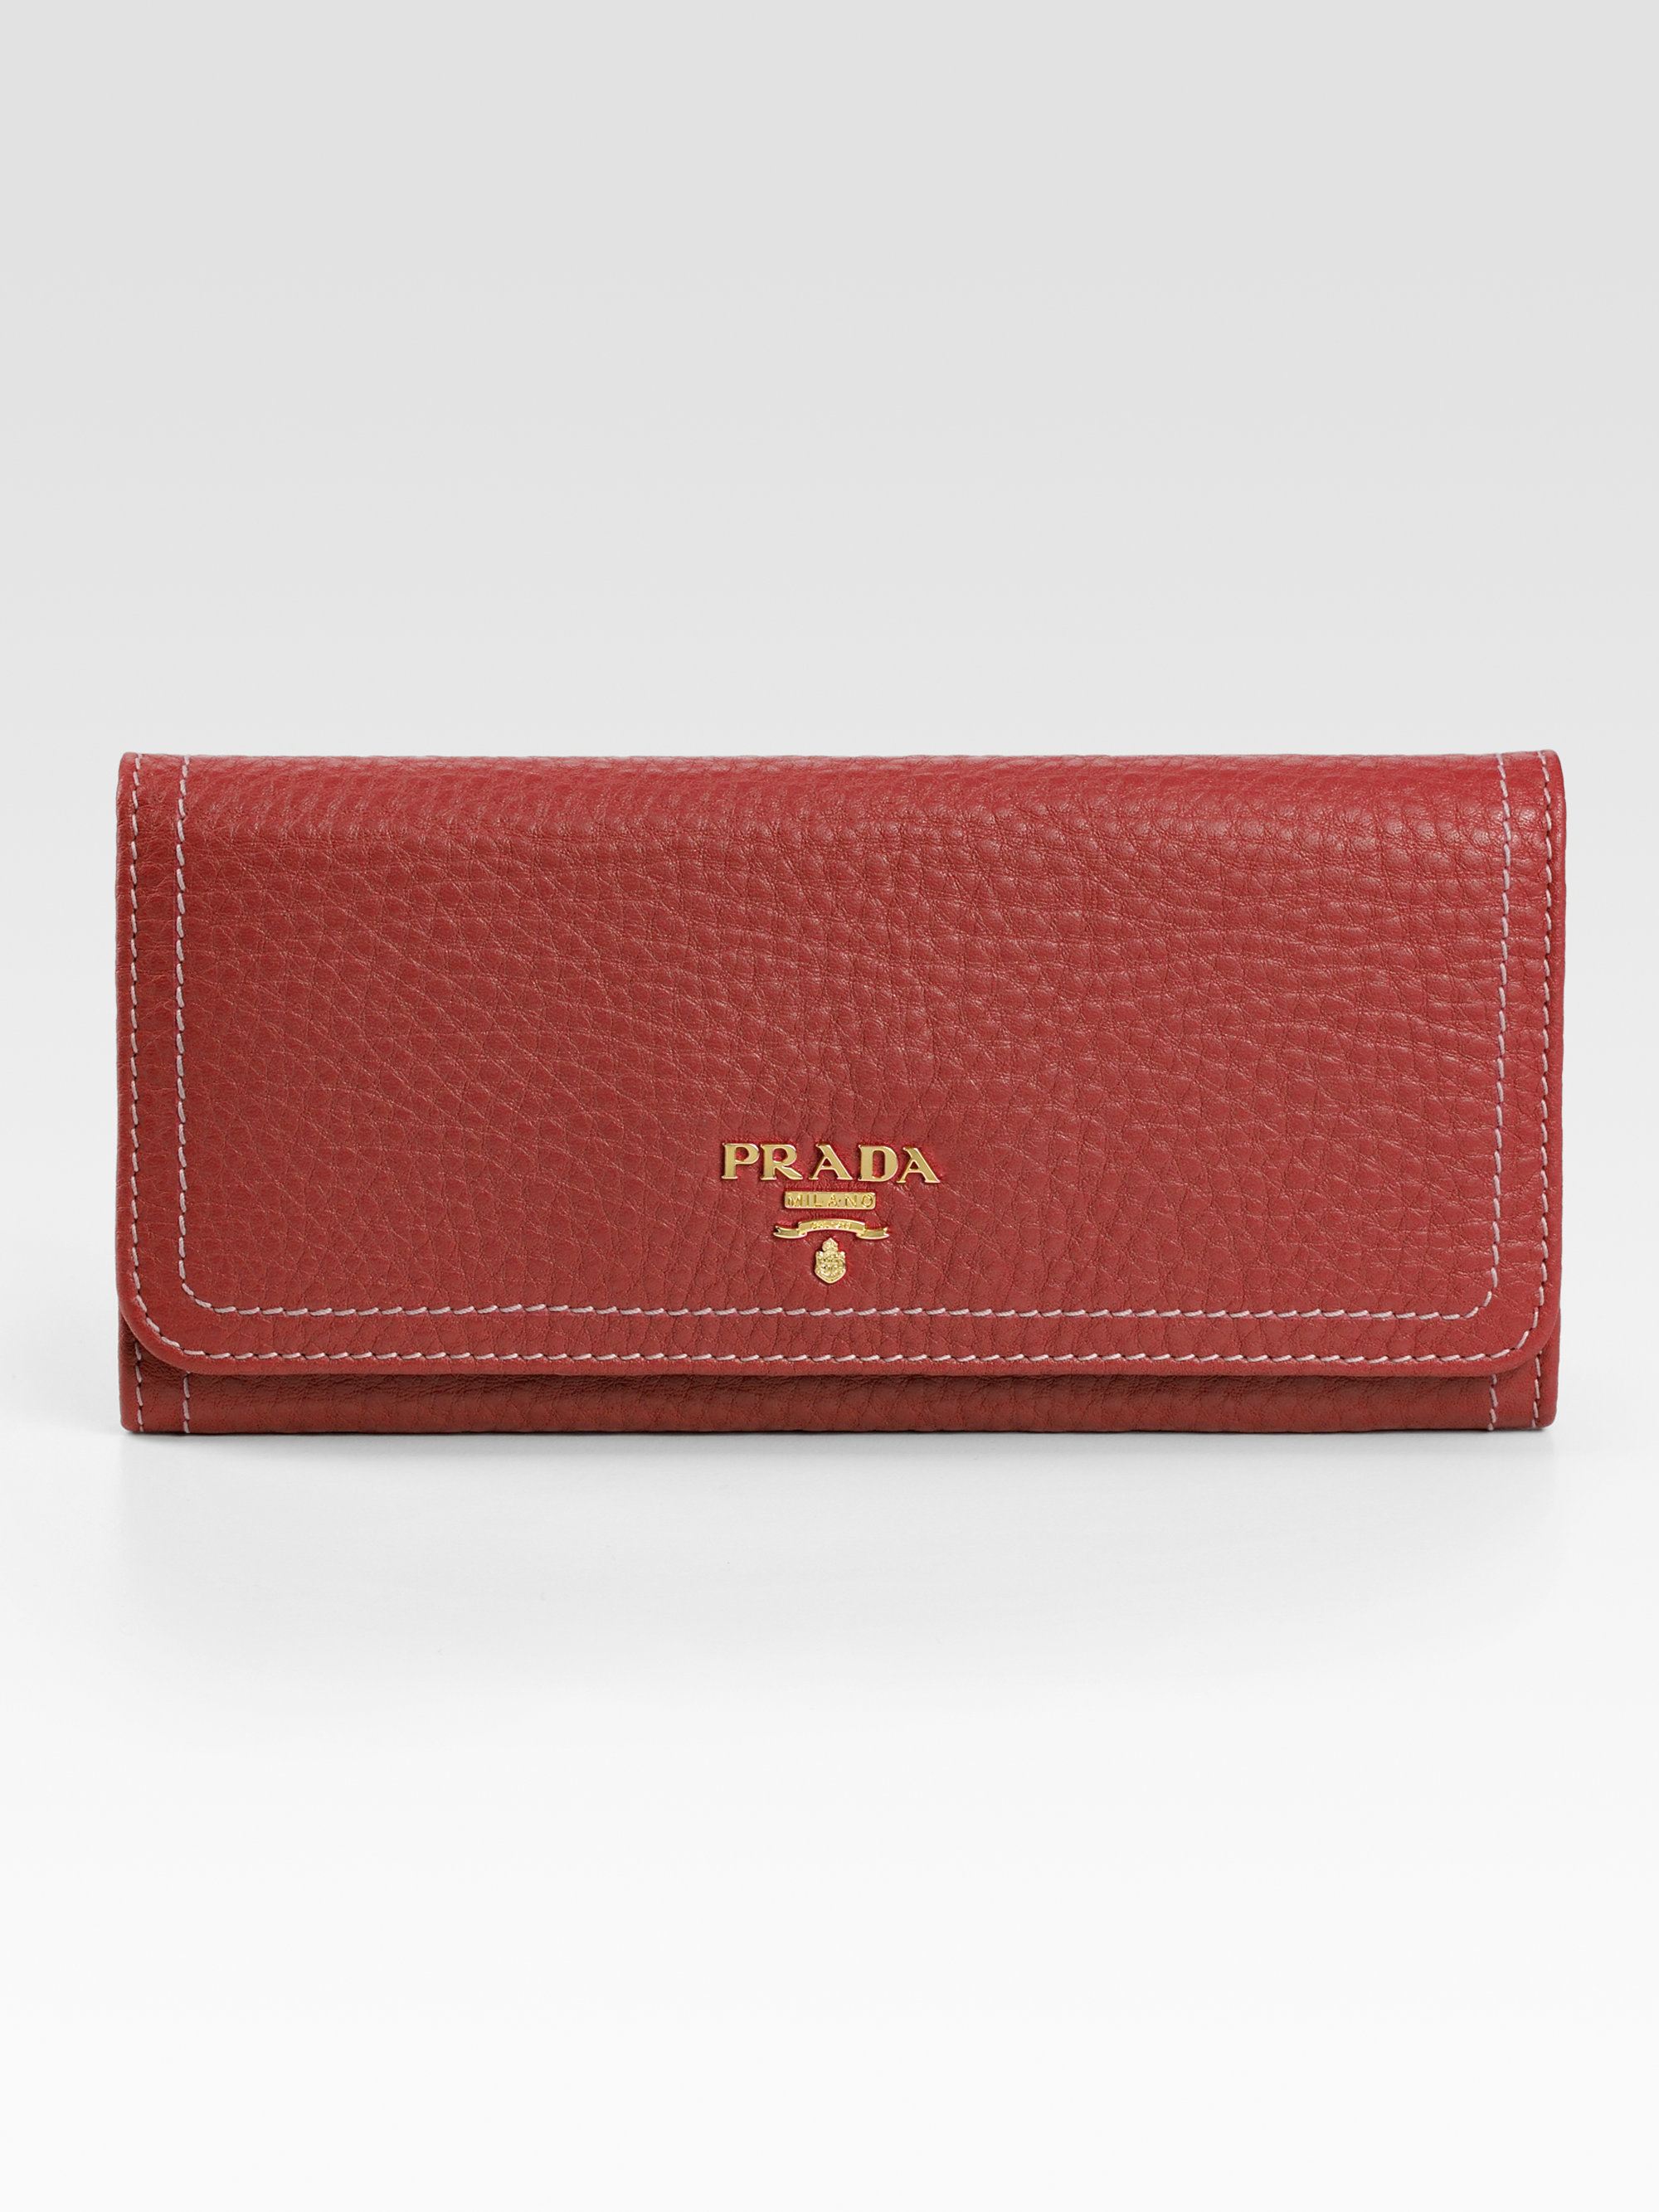 Prada Vitello Daino Flap Continental Wallet in Red (rosso-red) | Lyst  